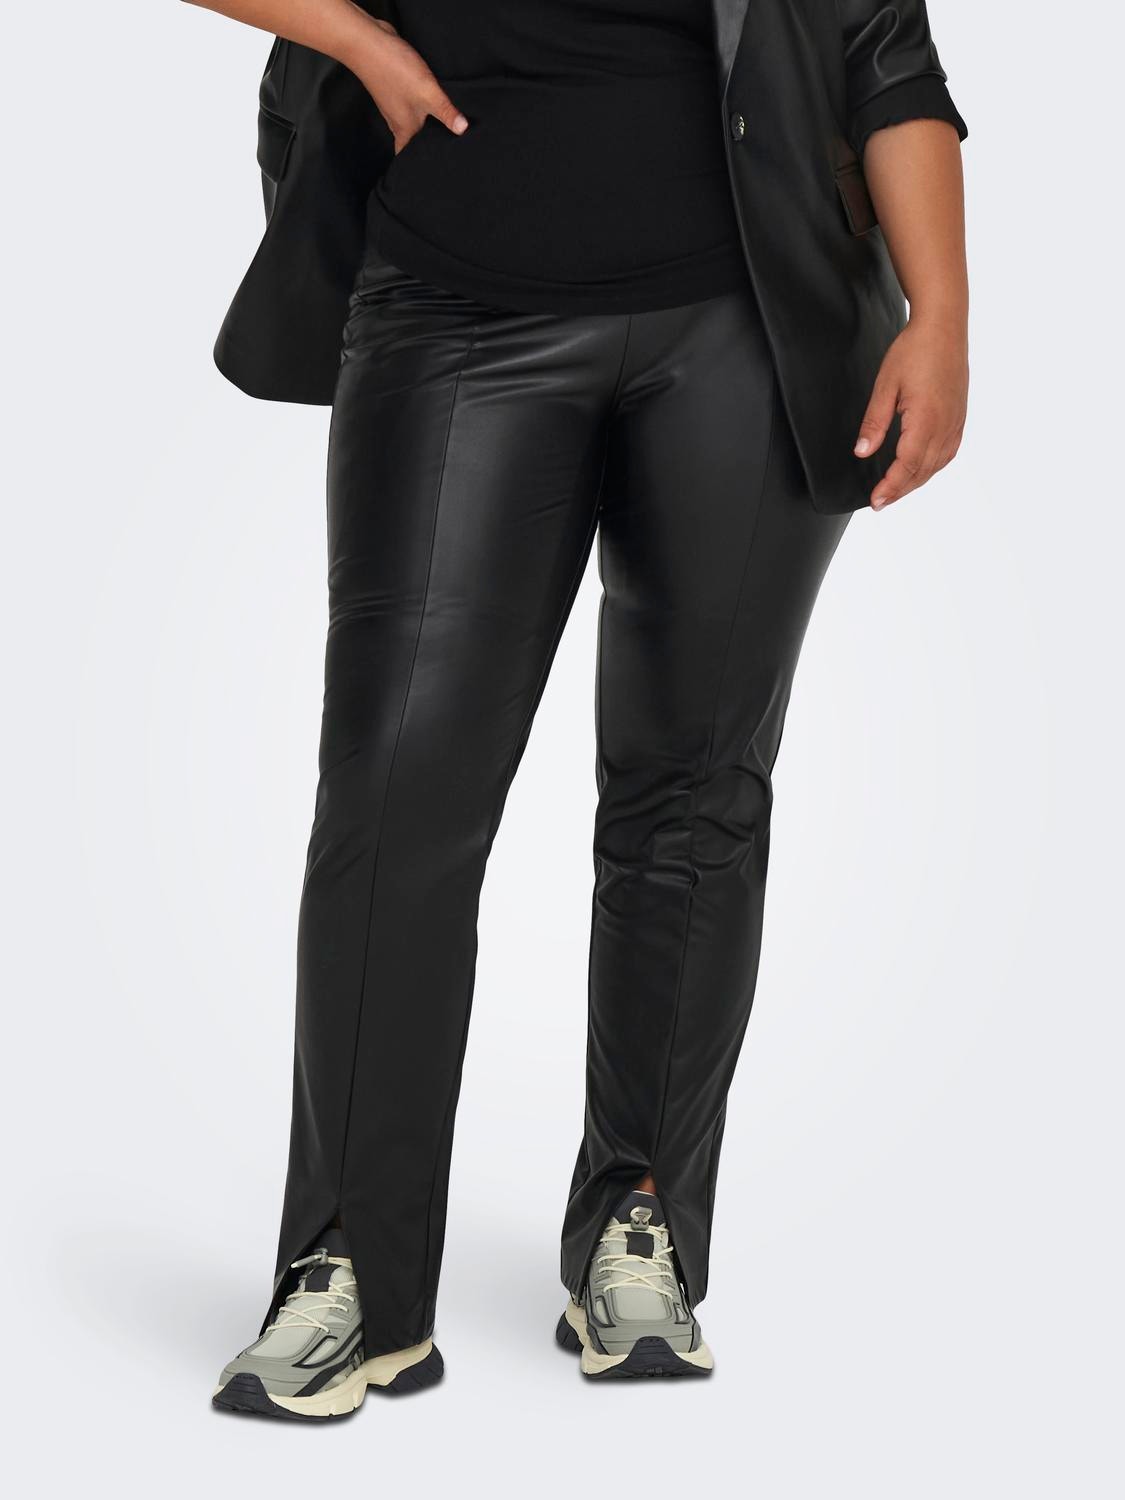 curvy coated leggings with 30% discount!